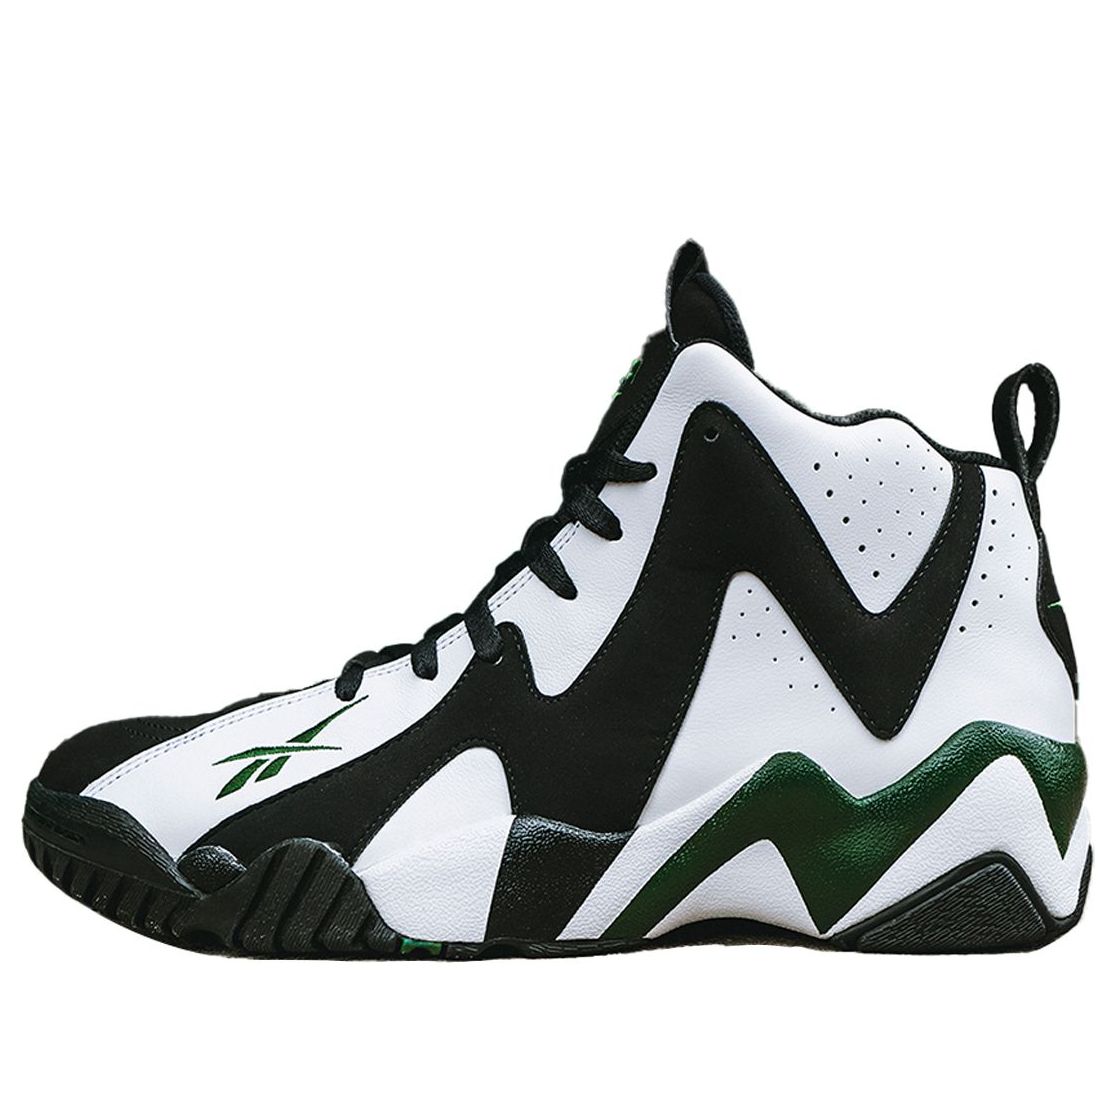 Reebok Kamikaze Sneakers for Men for Sale, Authenticity Guaranteed